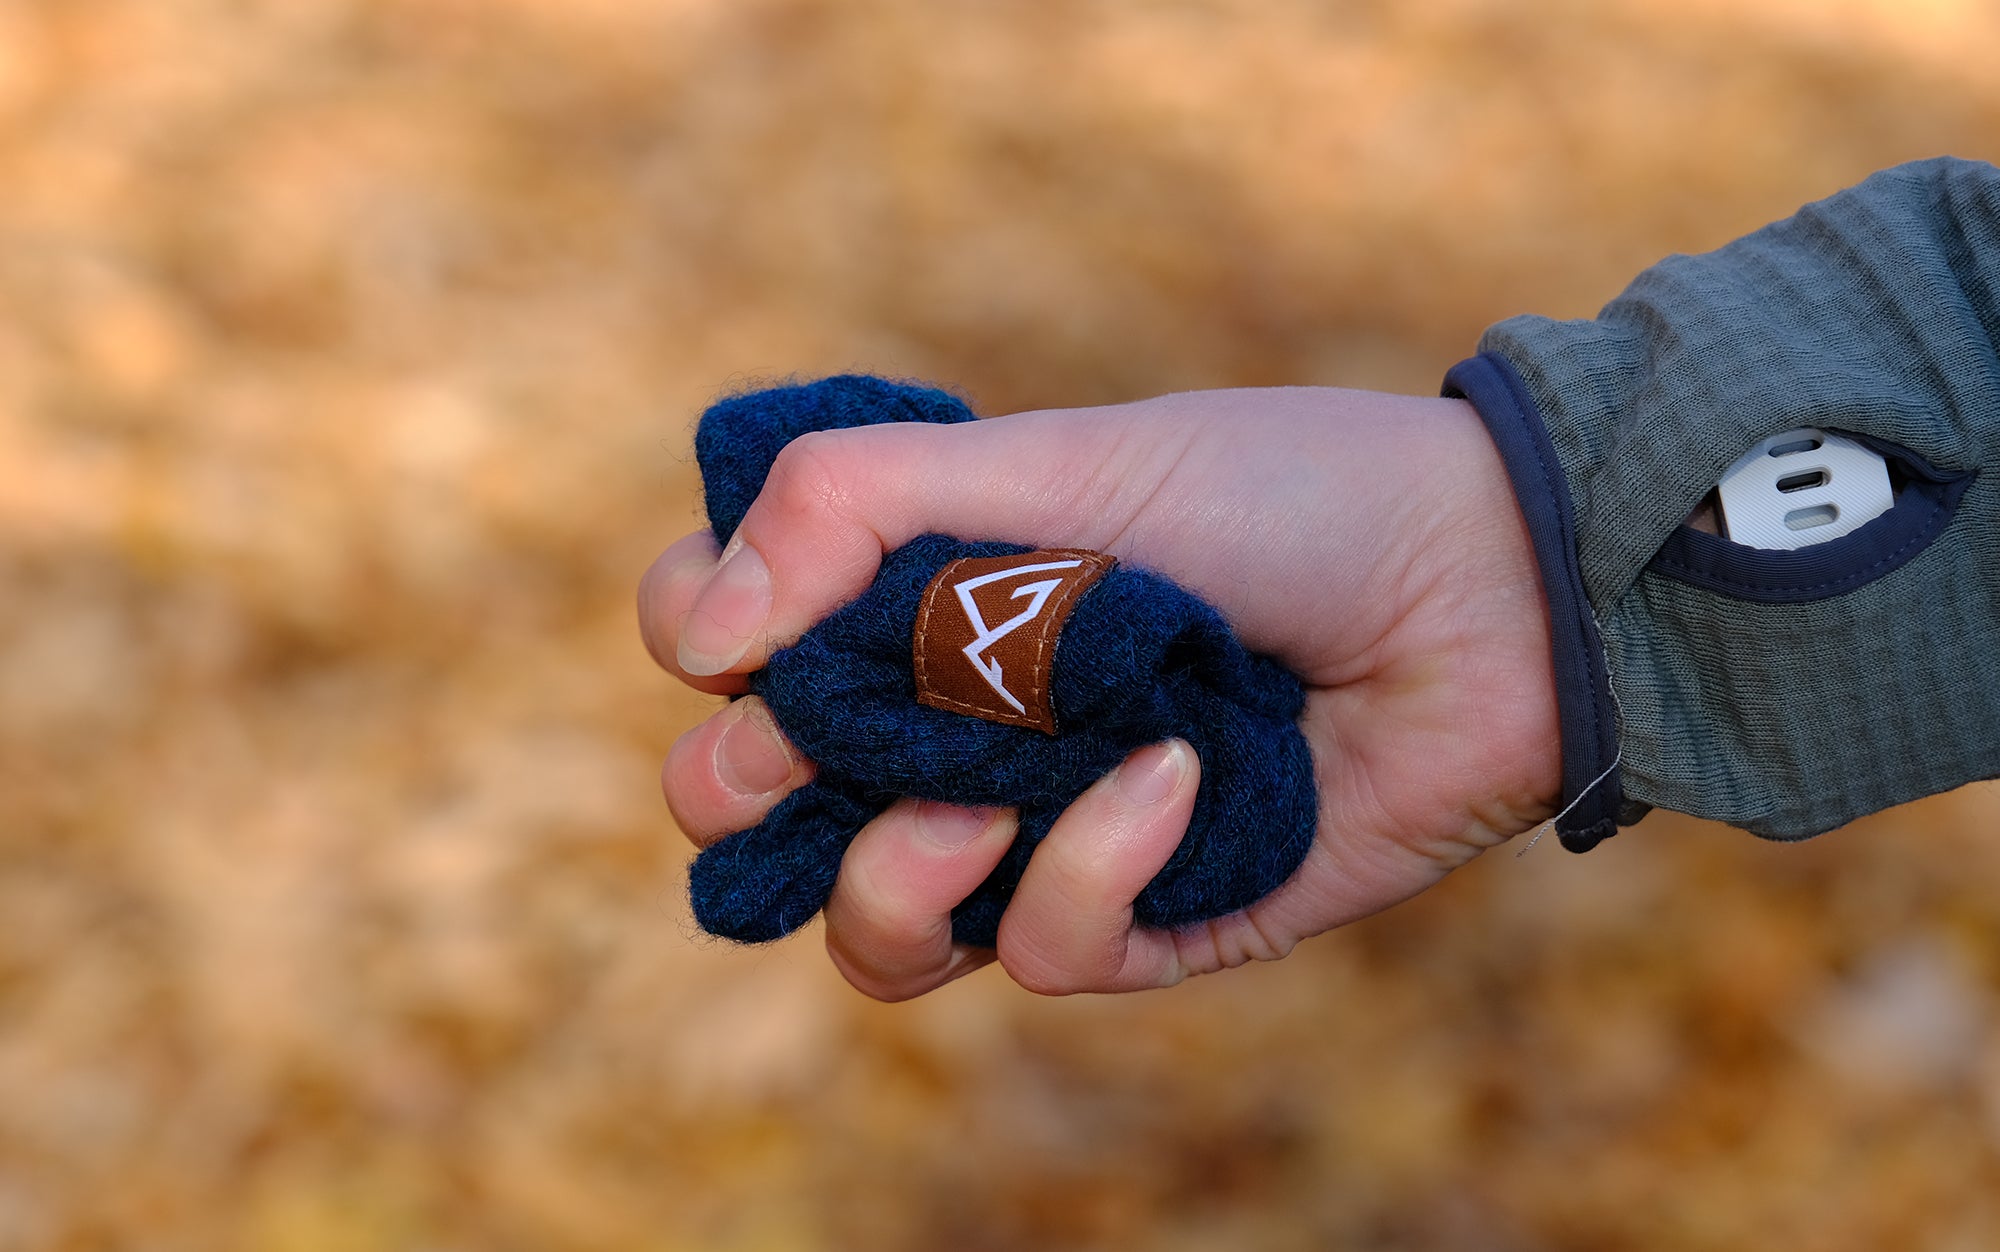 Author holds All-Paca Fleece Beanie in fist.